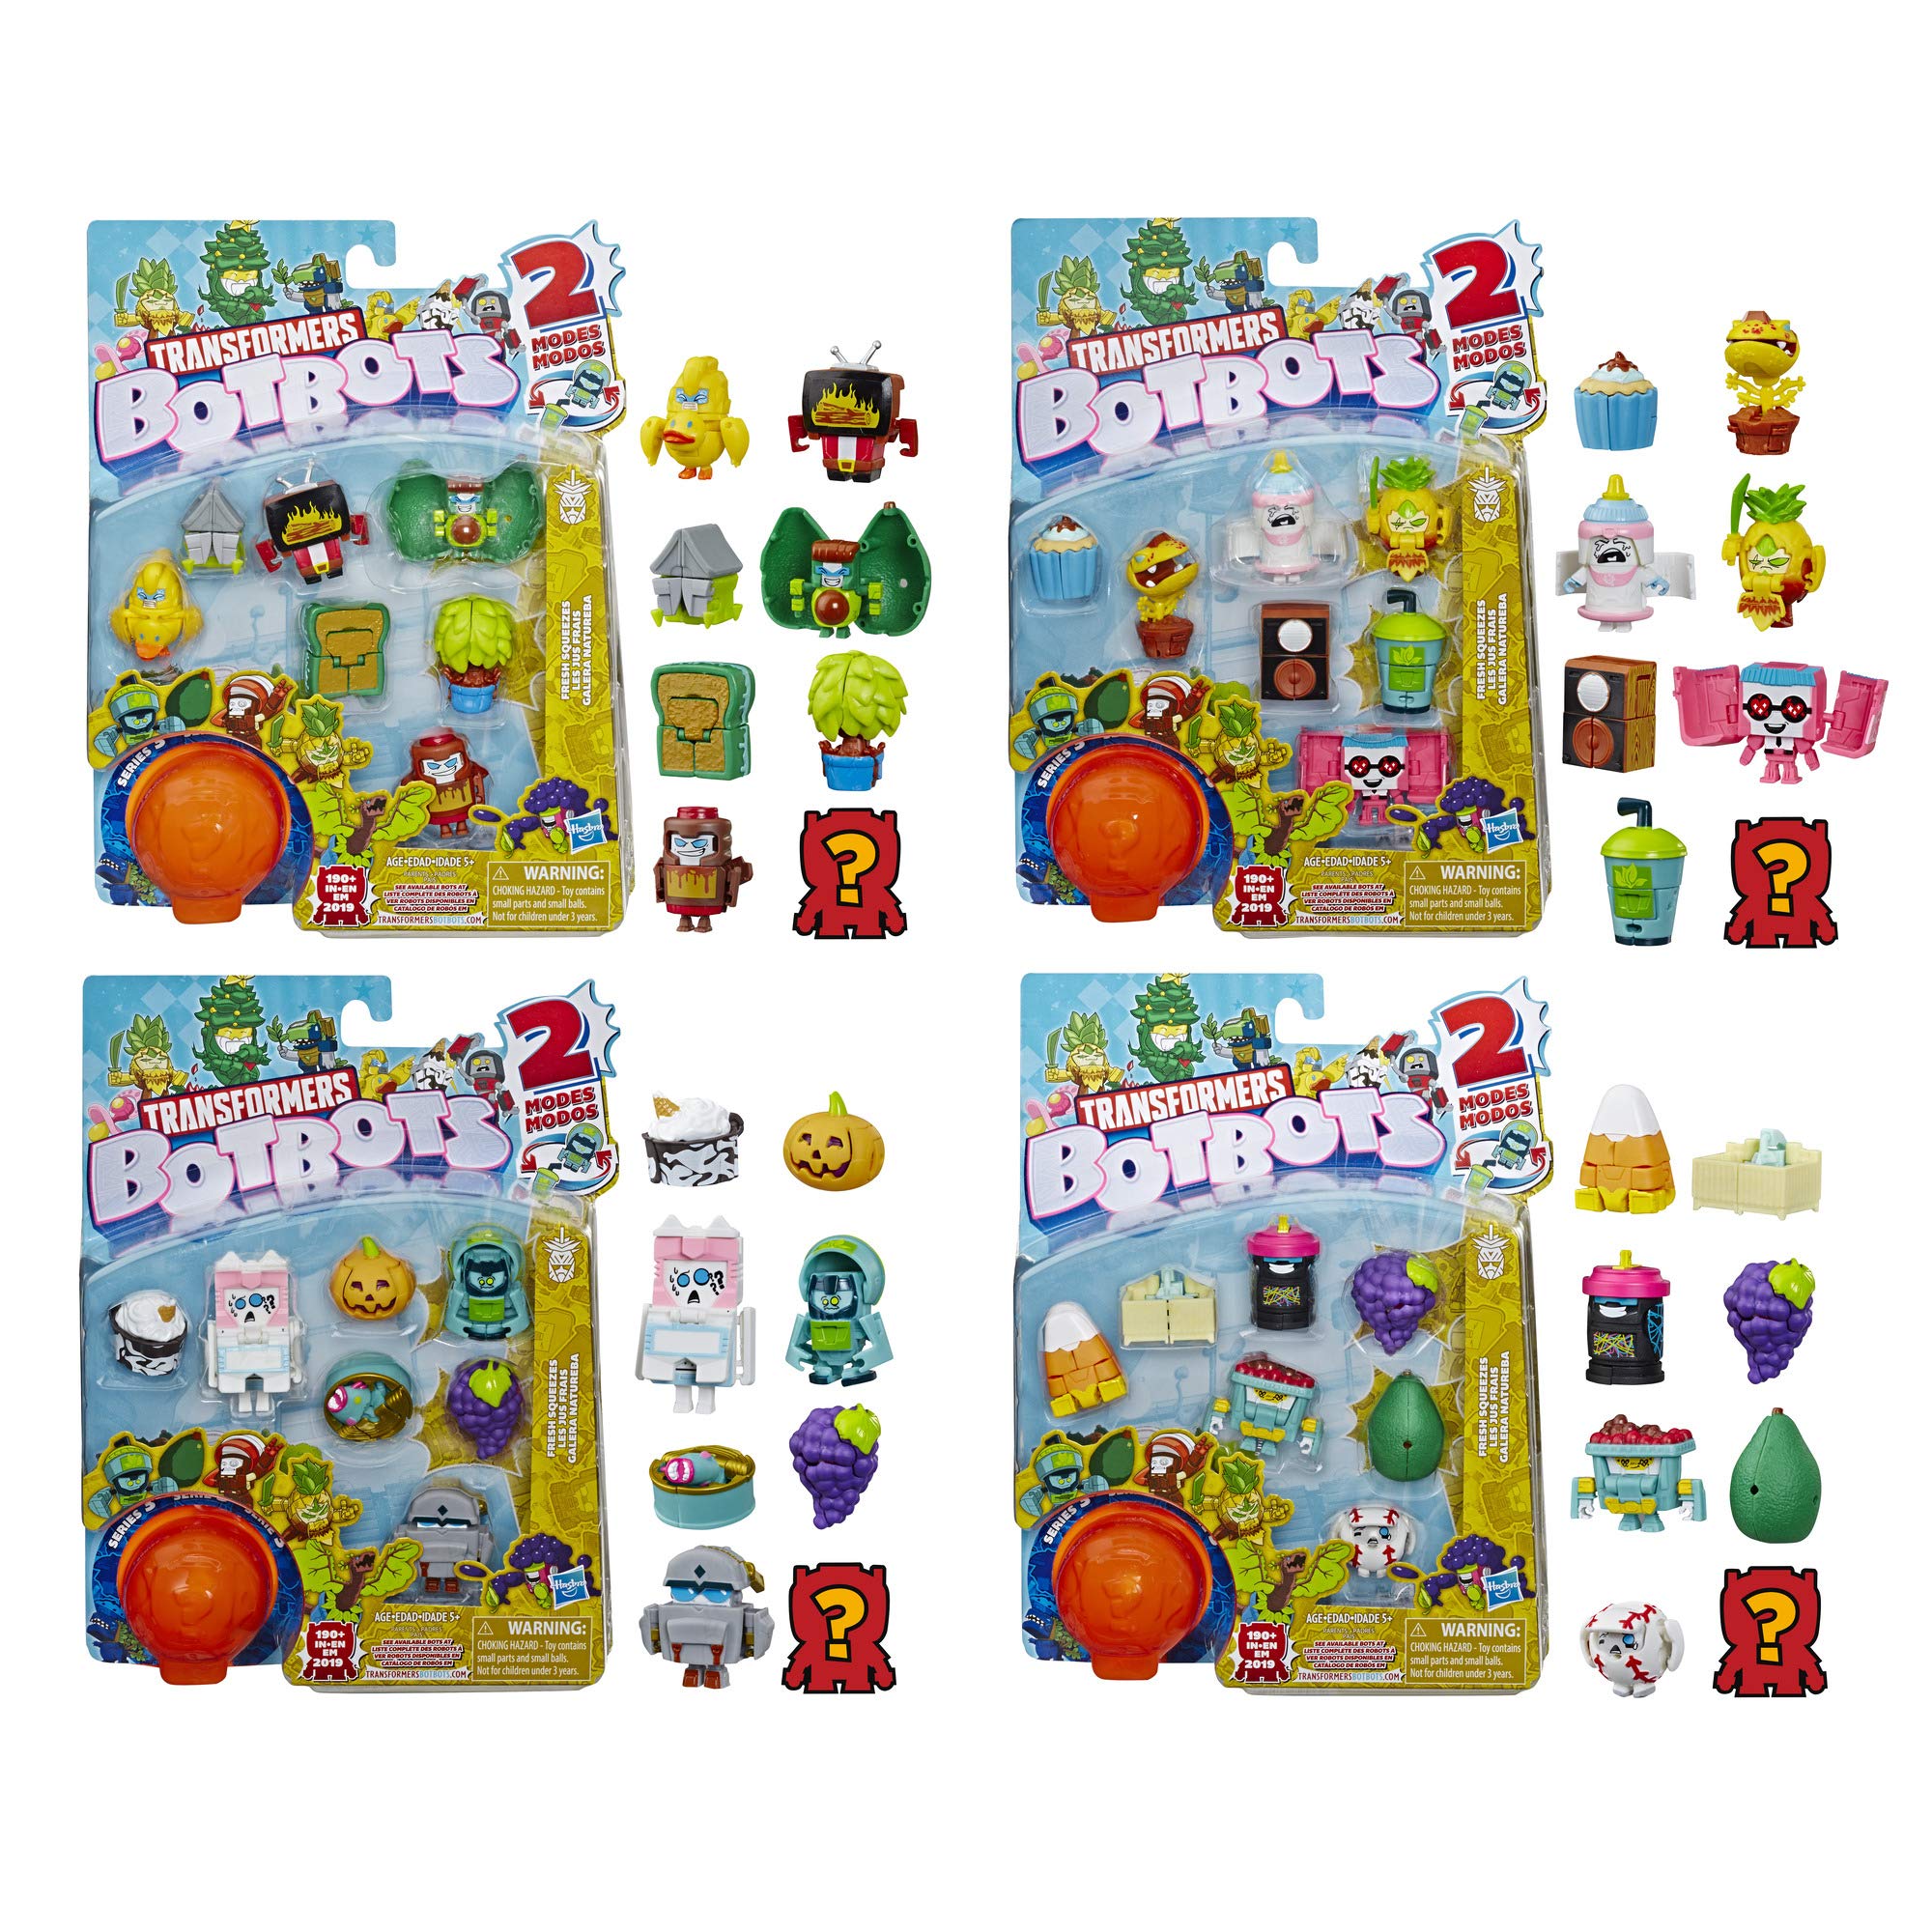 Transformers Toys Botbots Series 3 Fresh Squeezes 8 Pack - Mystery 2-in-1 Collectible Figures! Kids Ages 5 & Up (Styles & Colors May Vary) by Hasbro